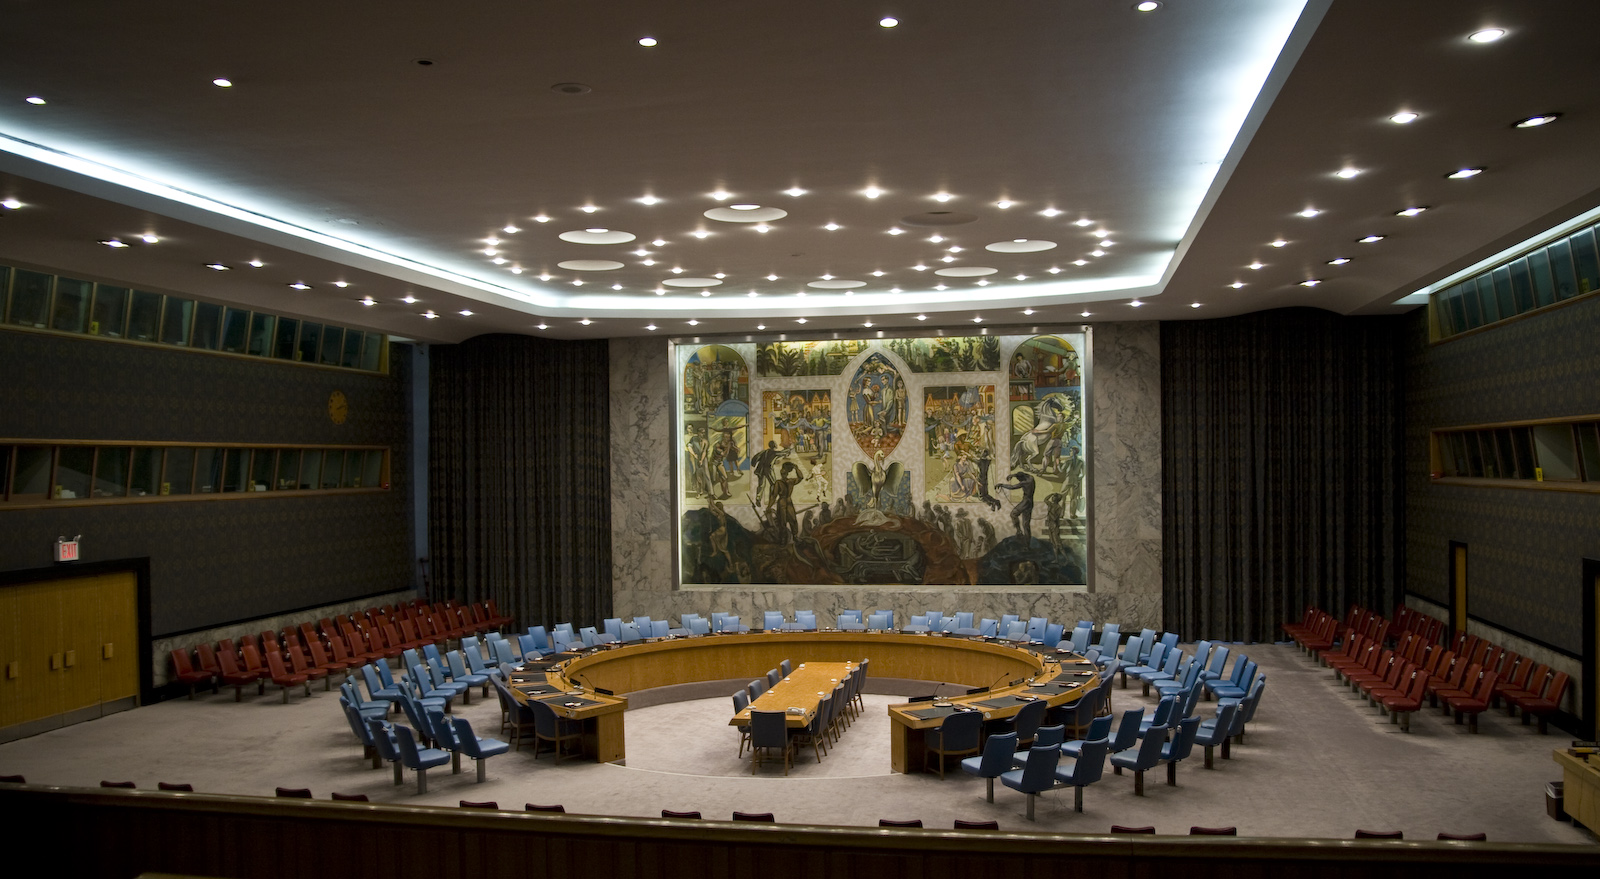 The UN Security Council chamber